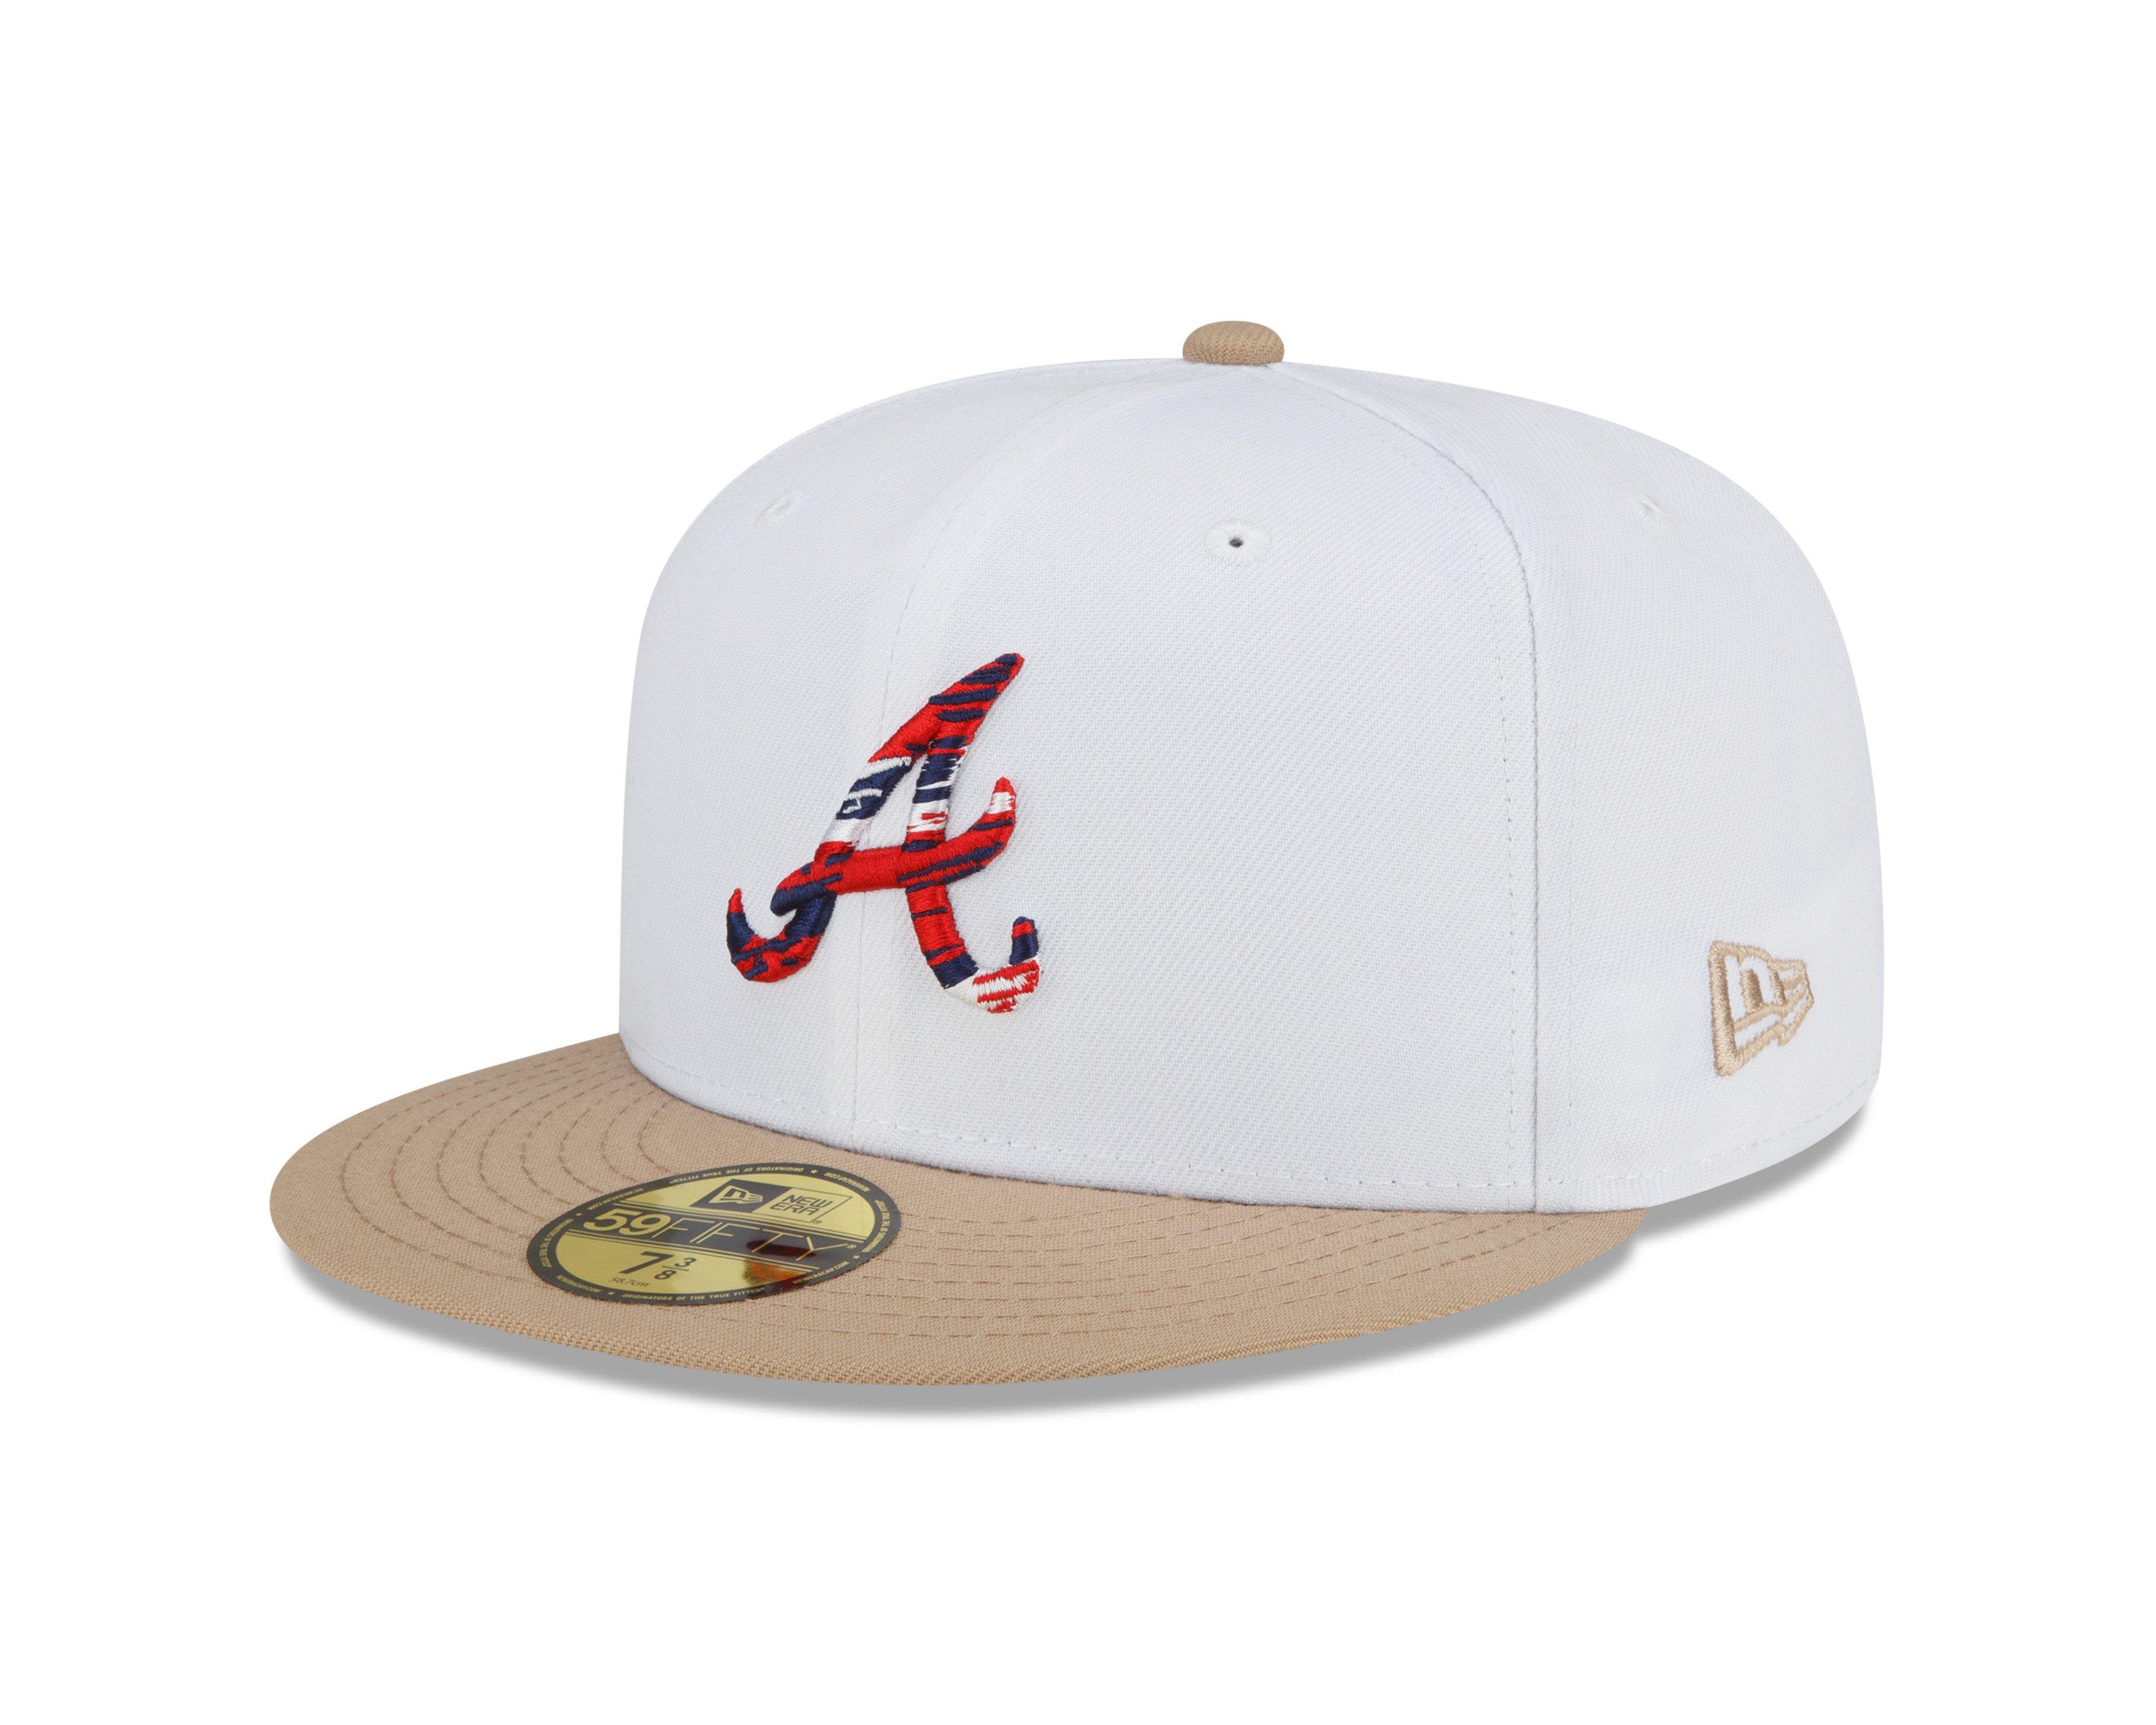 Vintage Atlanta Braves Fitted Hat New Era Made USA Size 7 1/8 